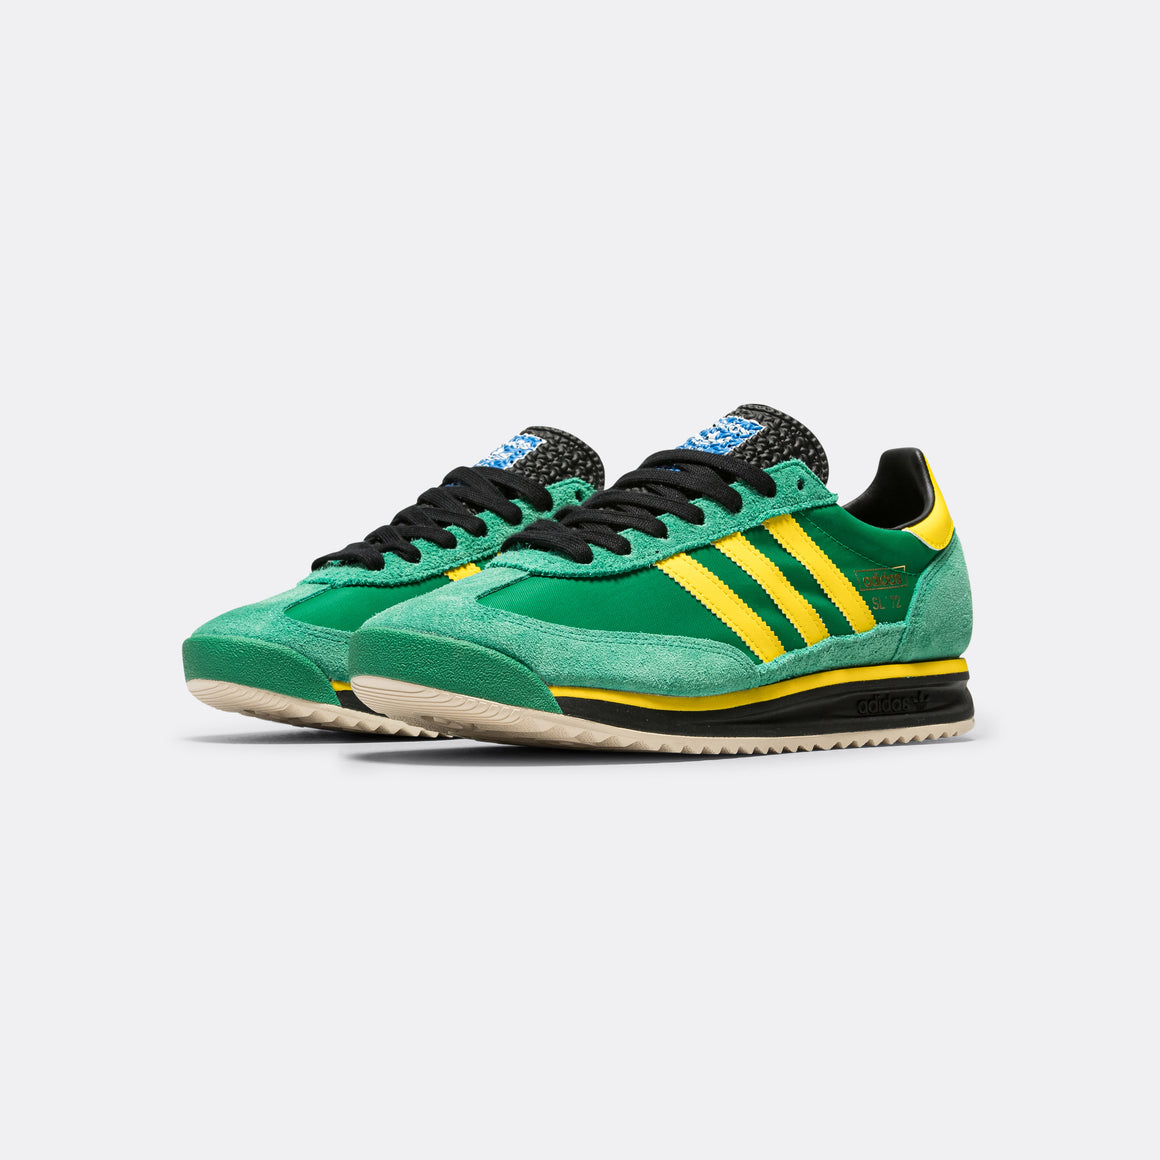 adidas - SL 72 RS -  Green/Yellow-Core Black - UP THERE